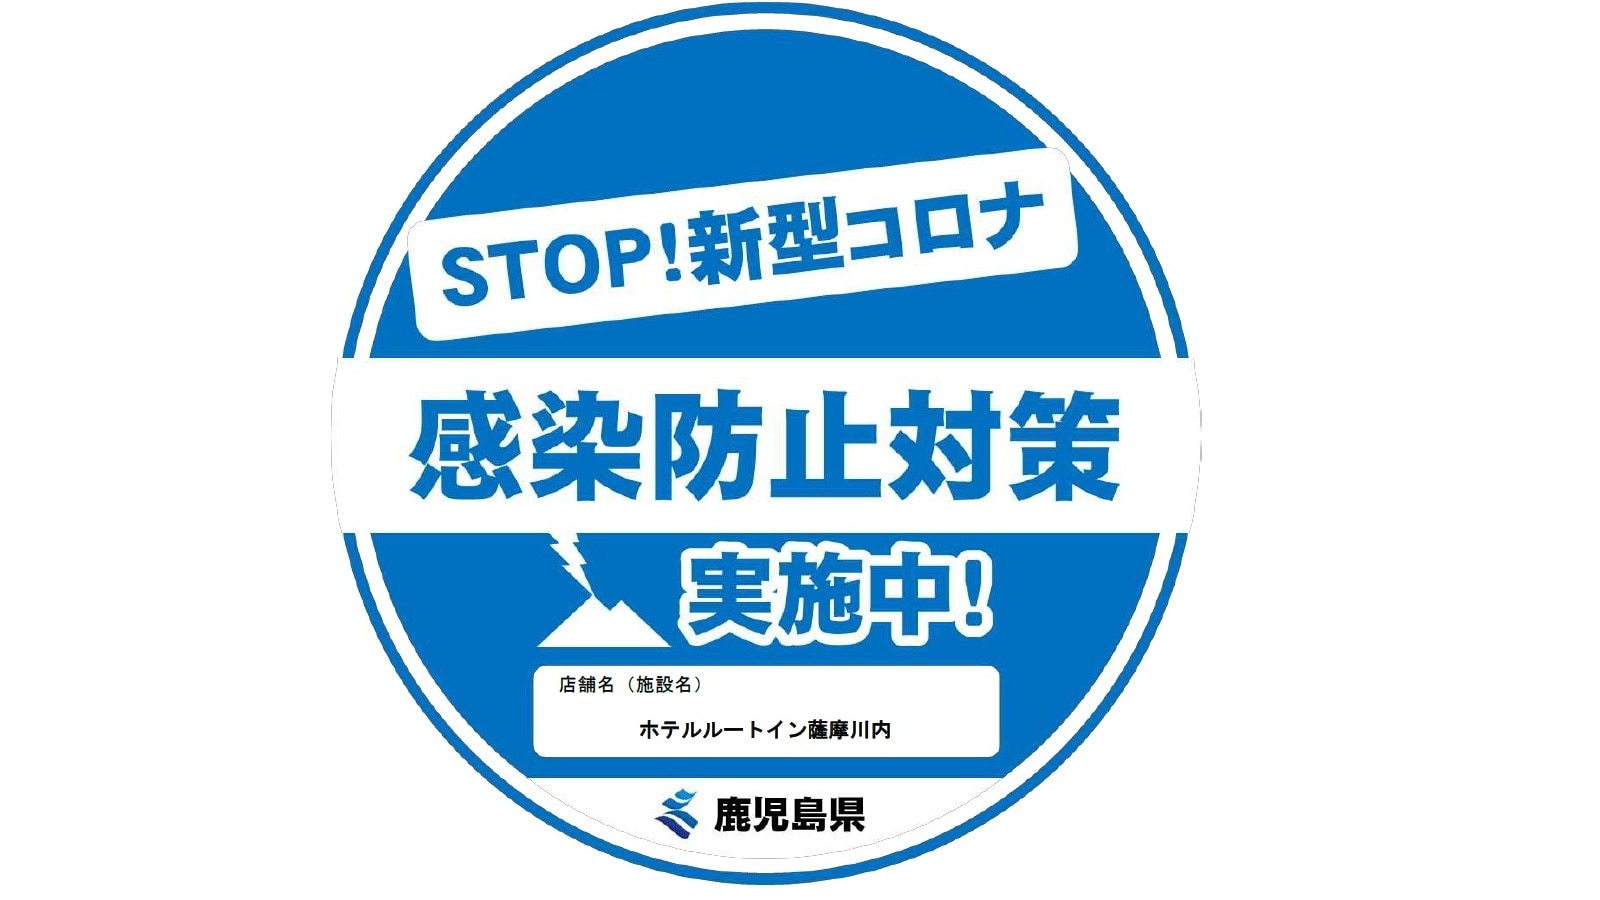 Our hotel is implementing measures to prevent infection with the new coronavirus in Kagoshima Prefecture.